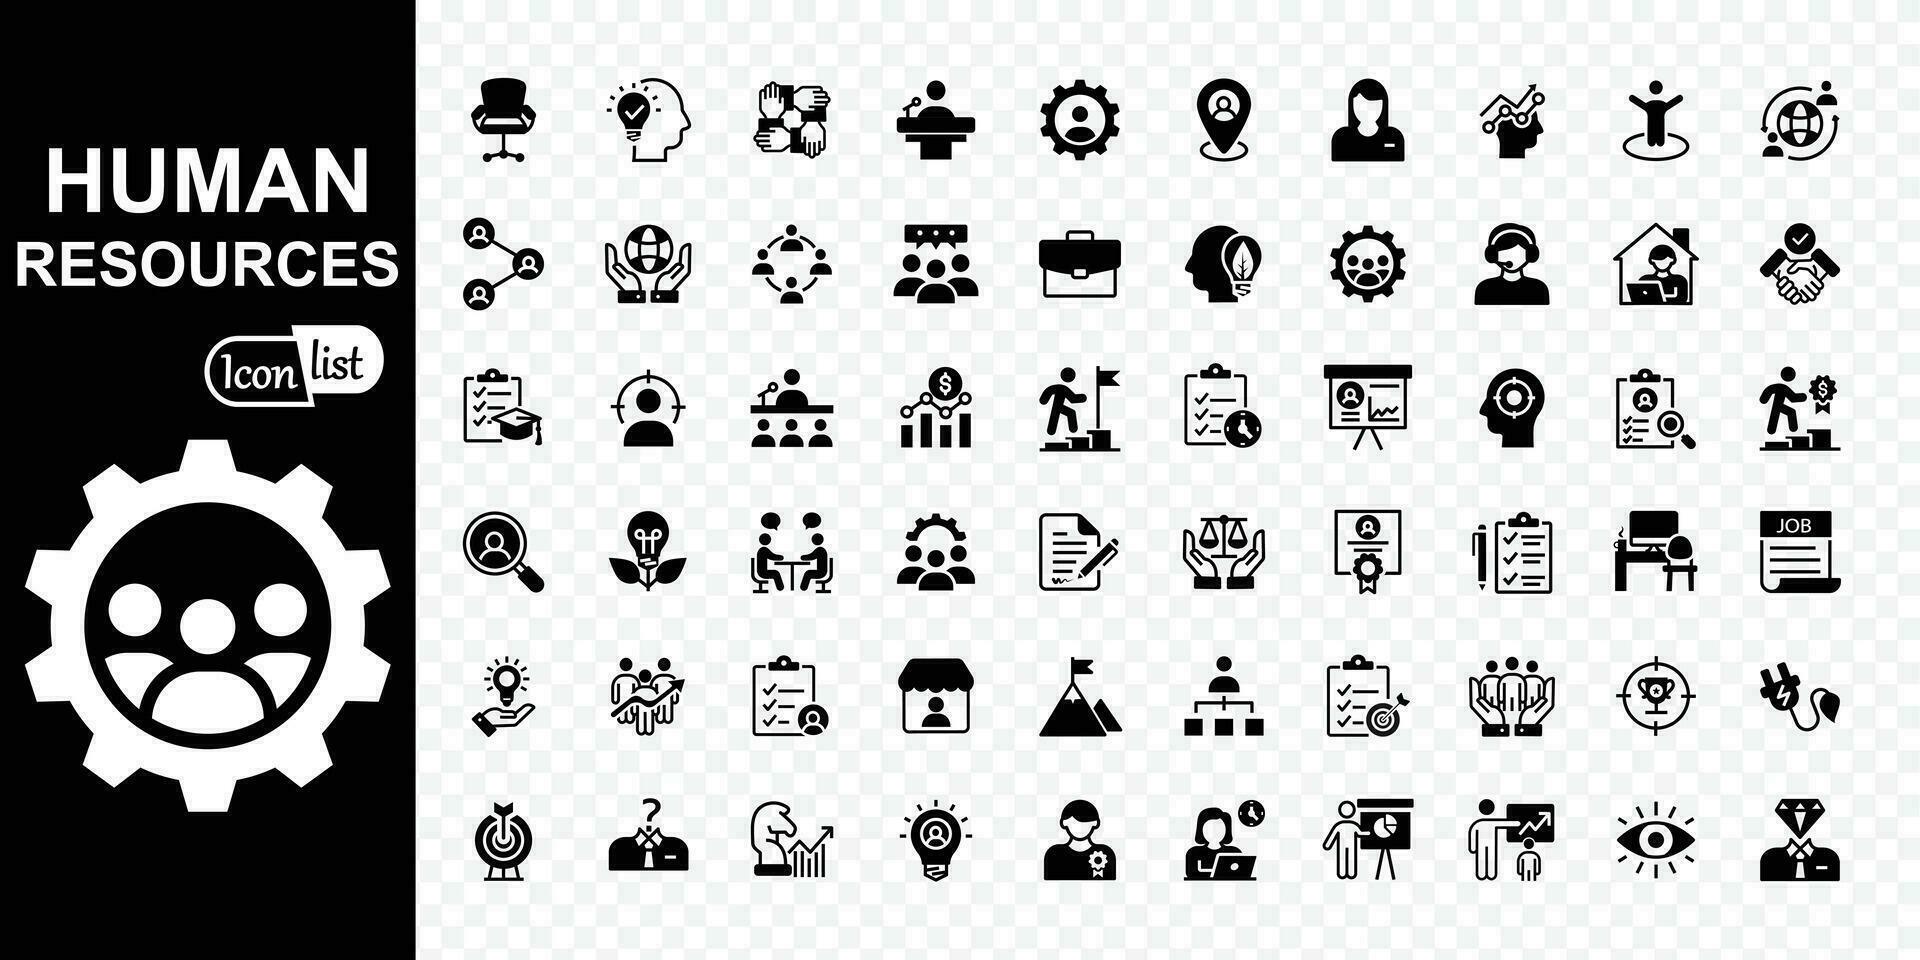 Human Resource editable icons collection. Simple vector illustration.